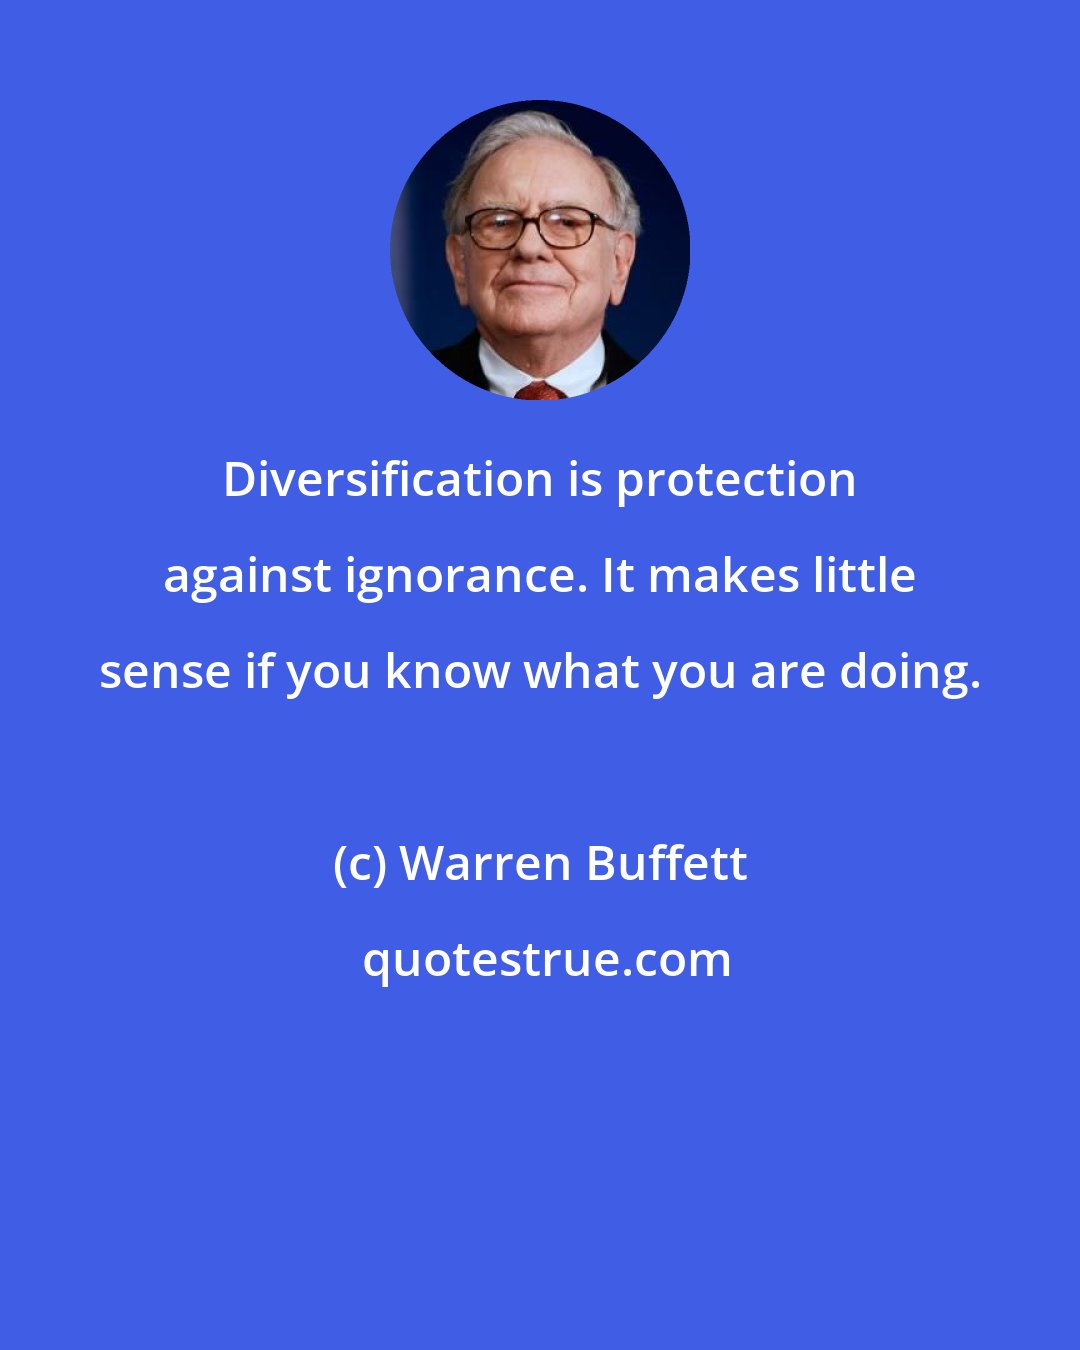 Warren Buffett: Diversification is protection against ignorance. It makes little sense if you know what you are doing.